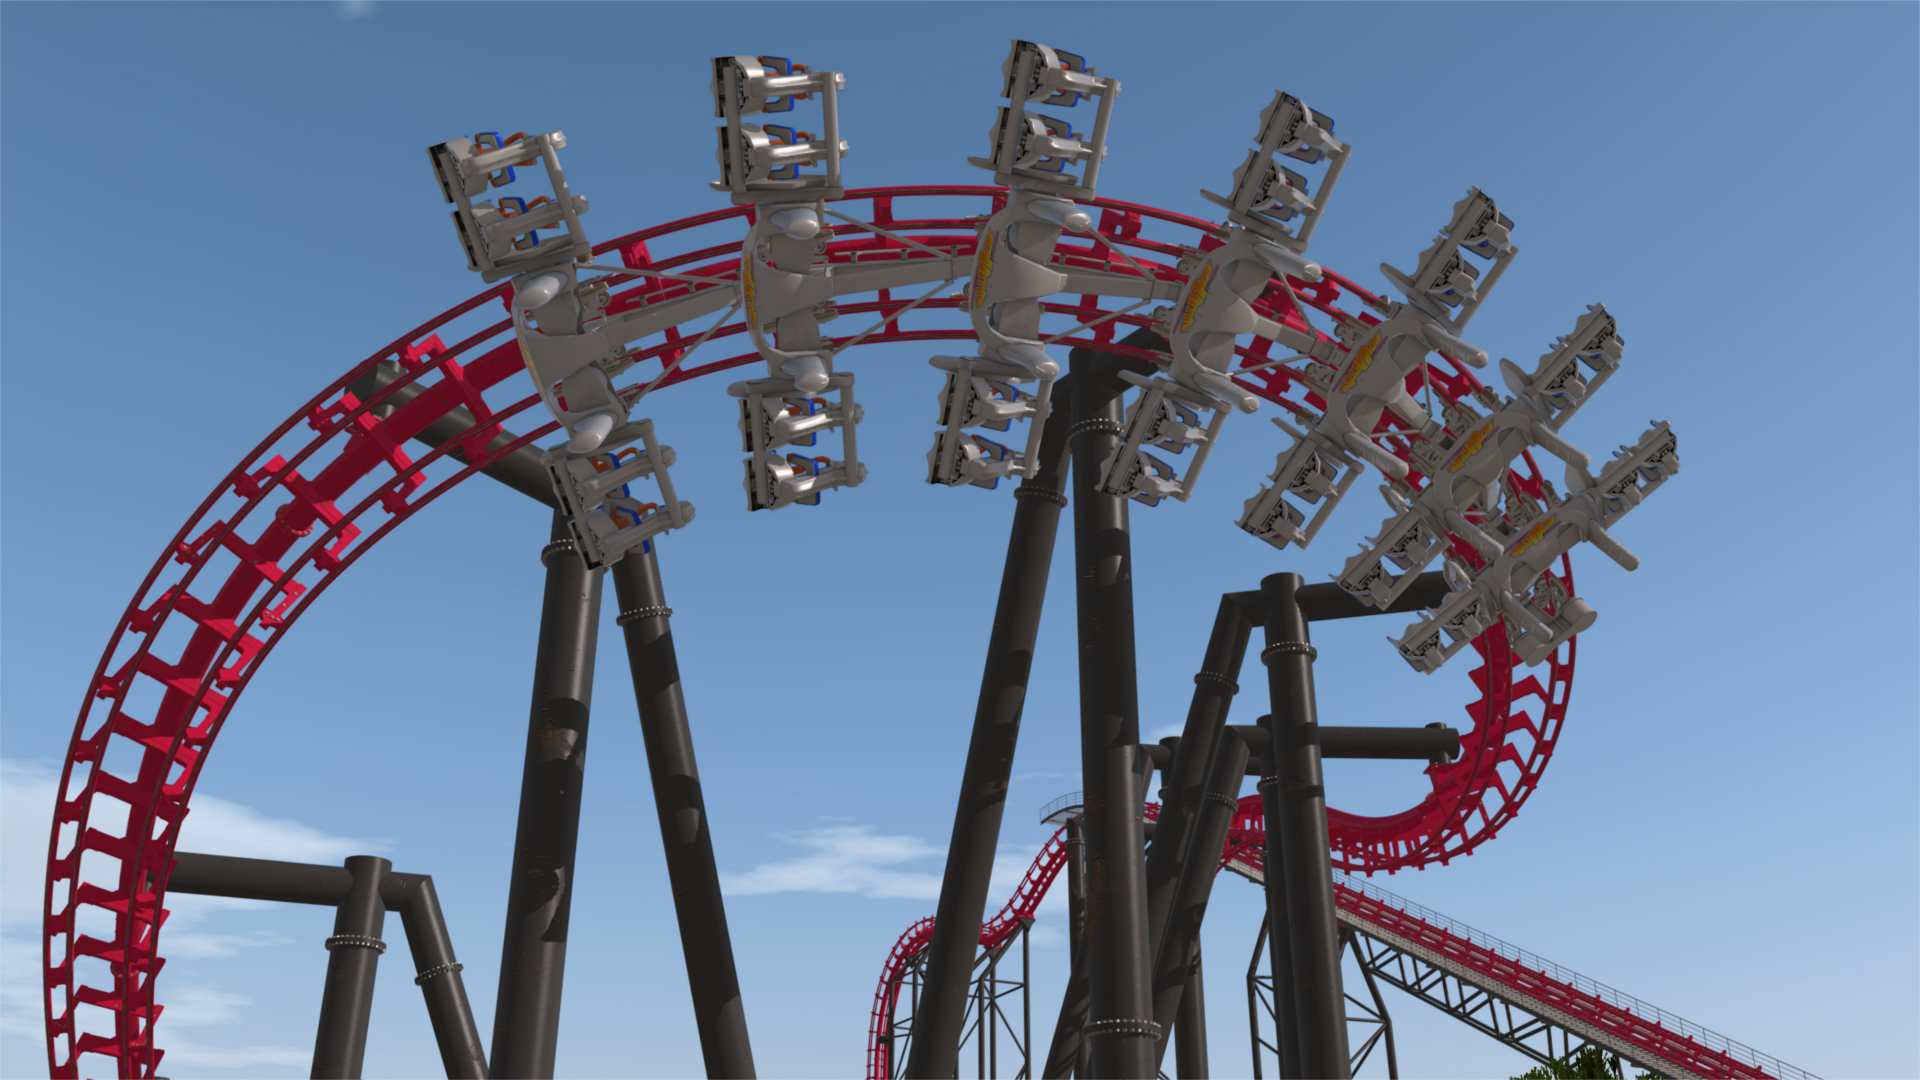 Nolimits 2 Roller Coaster Simulation Steam Download To Web